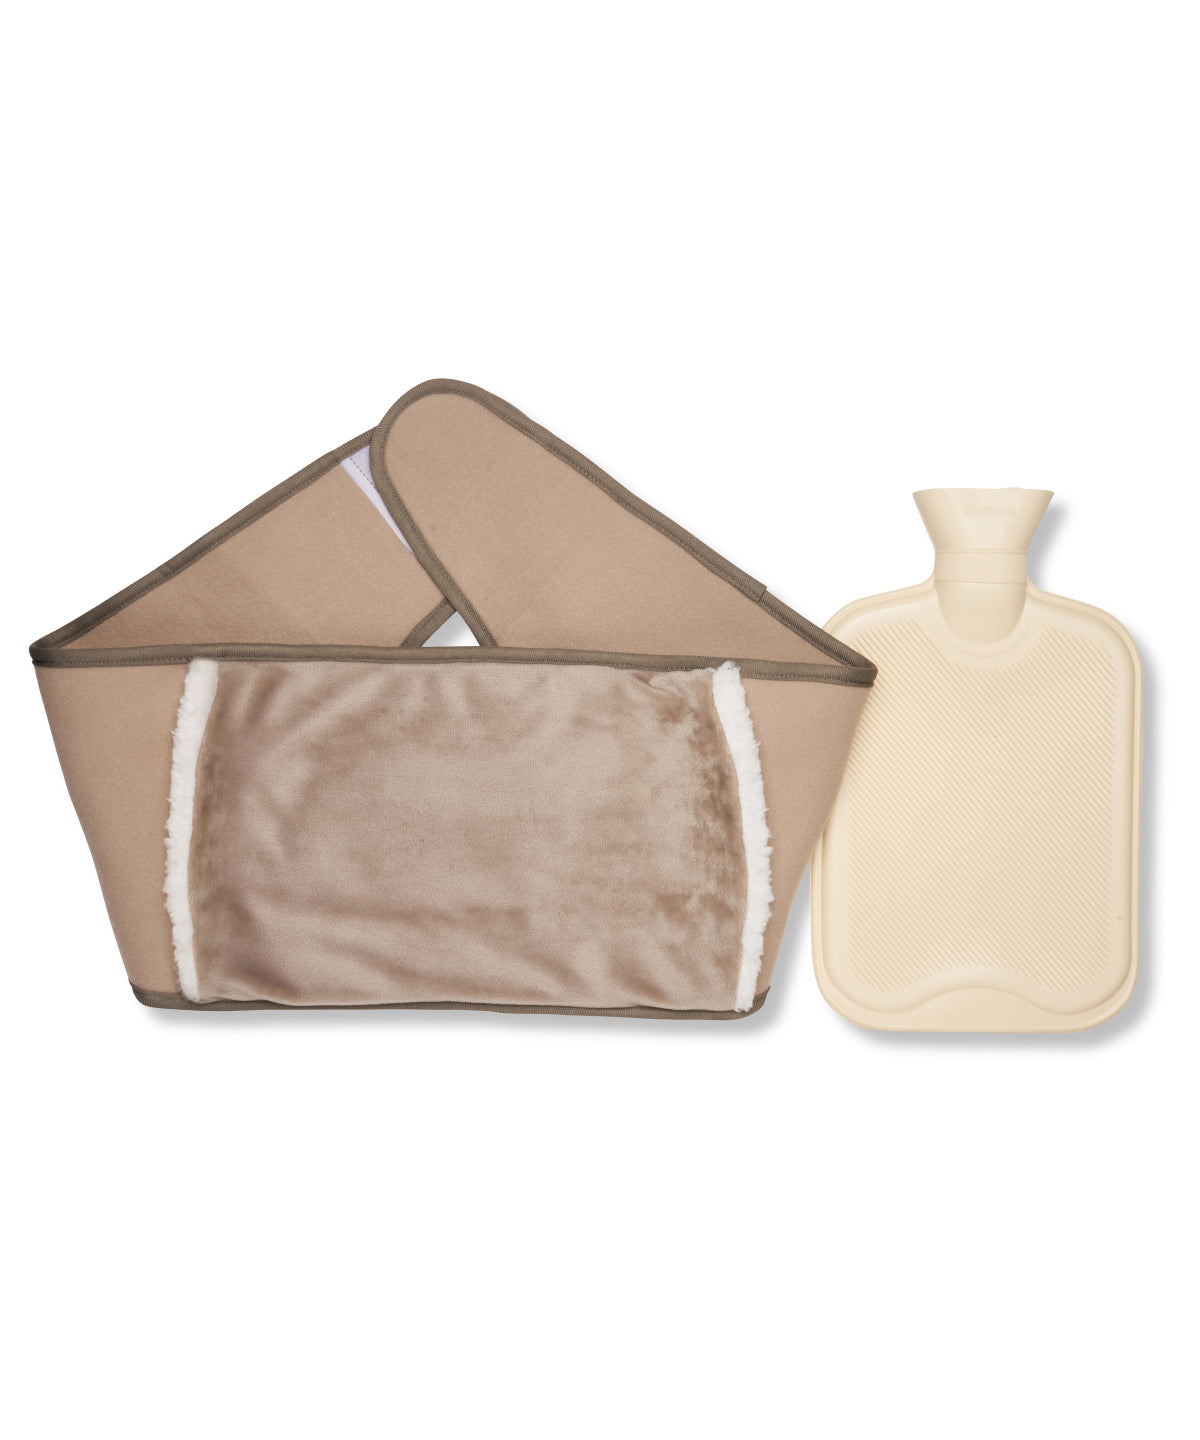 Gift- Hot Water Bottle Pouch -Straps around your body